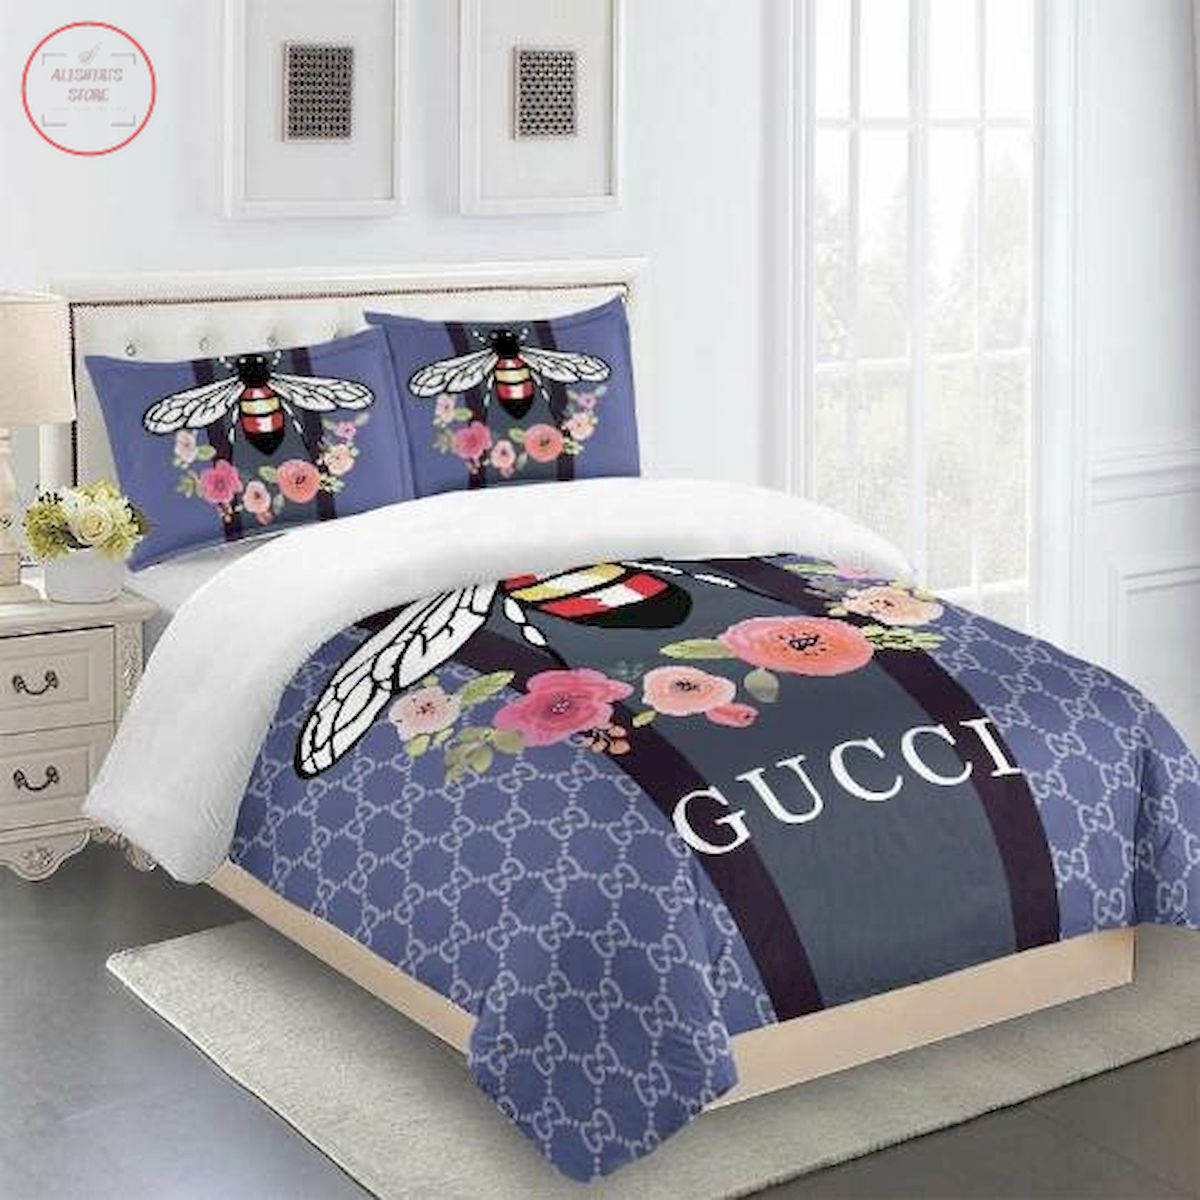 Gucci bedding set blue and flowers fly Luxury bed sheets